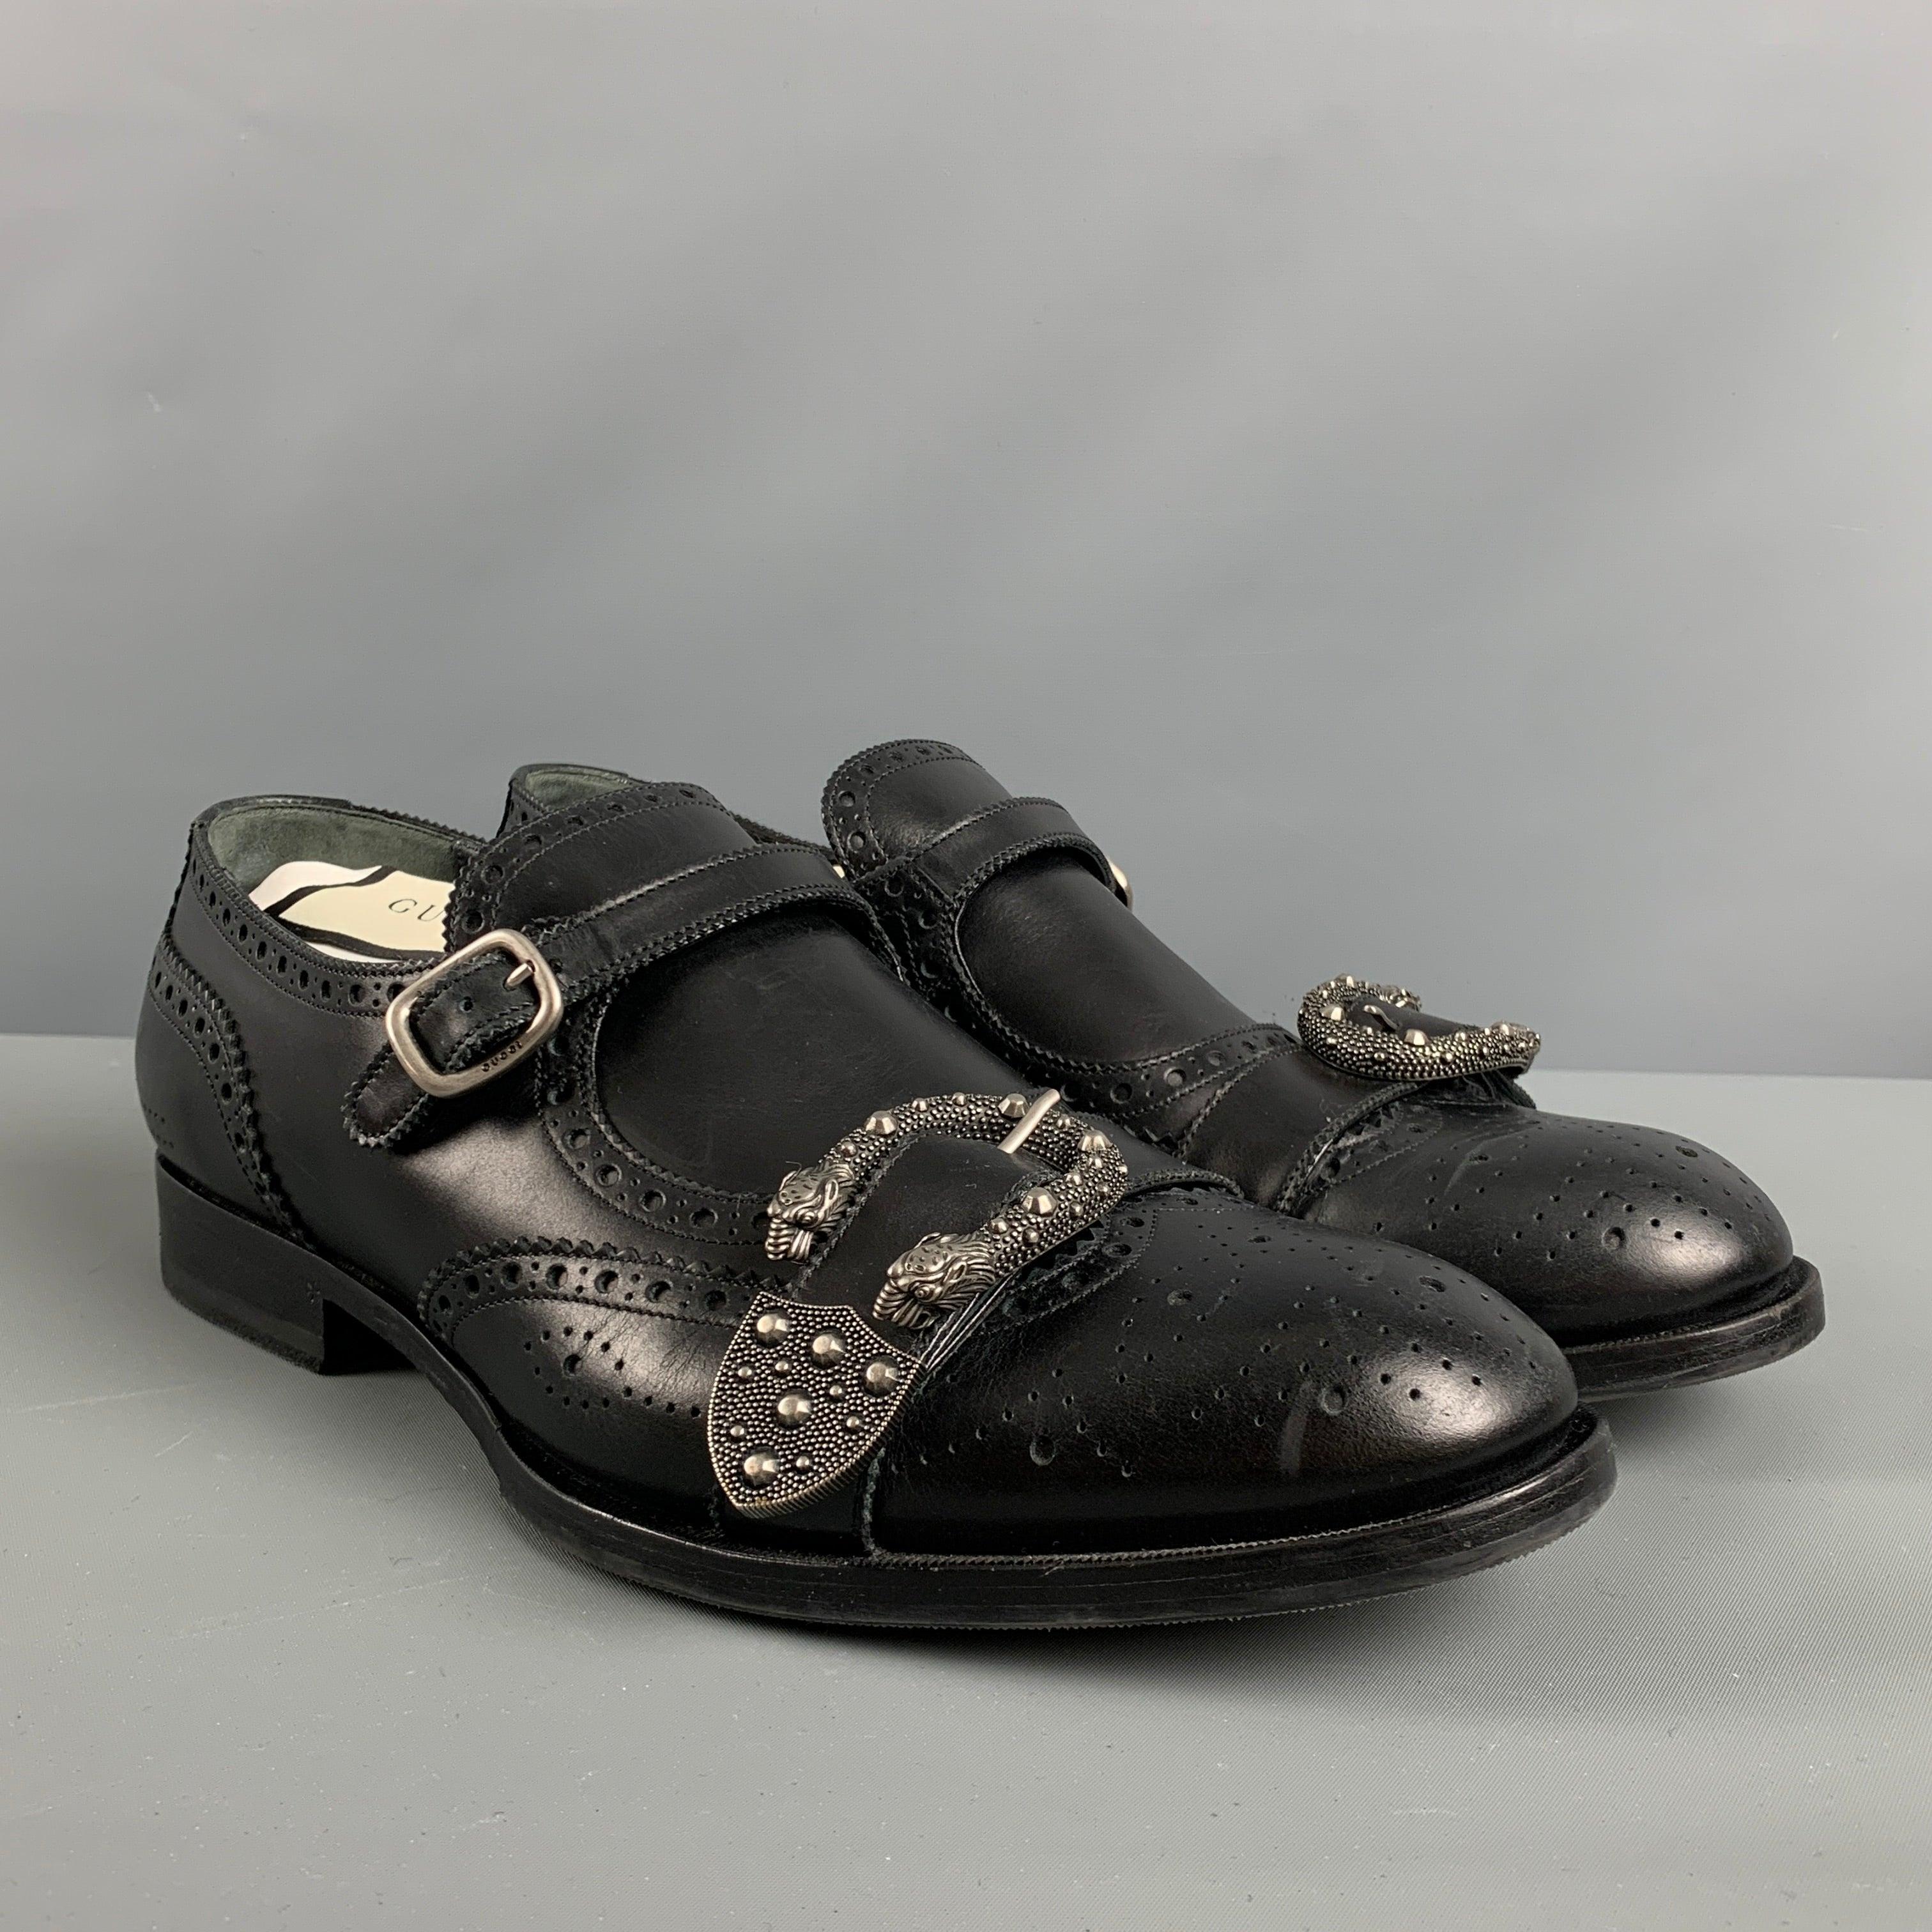 GUCCI loafers comes in a black perforated leather featuring a silver tone 